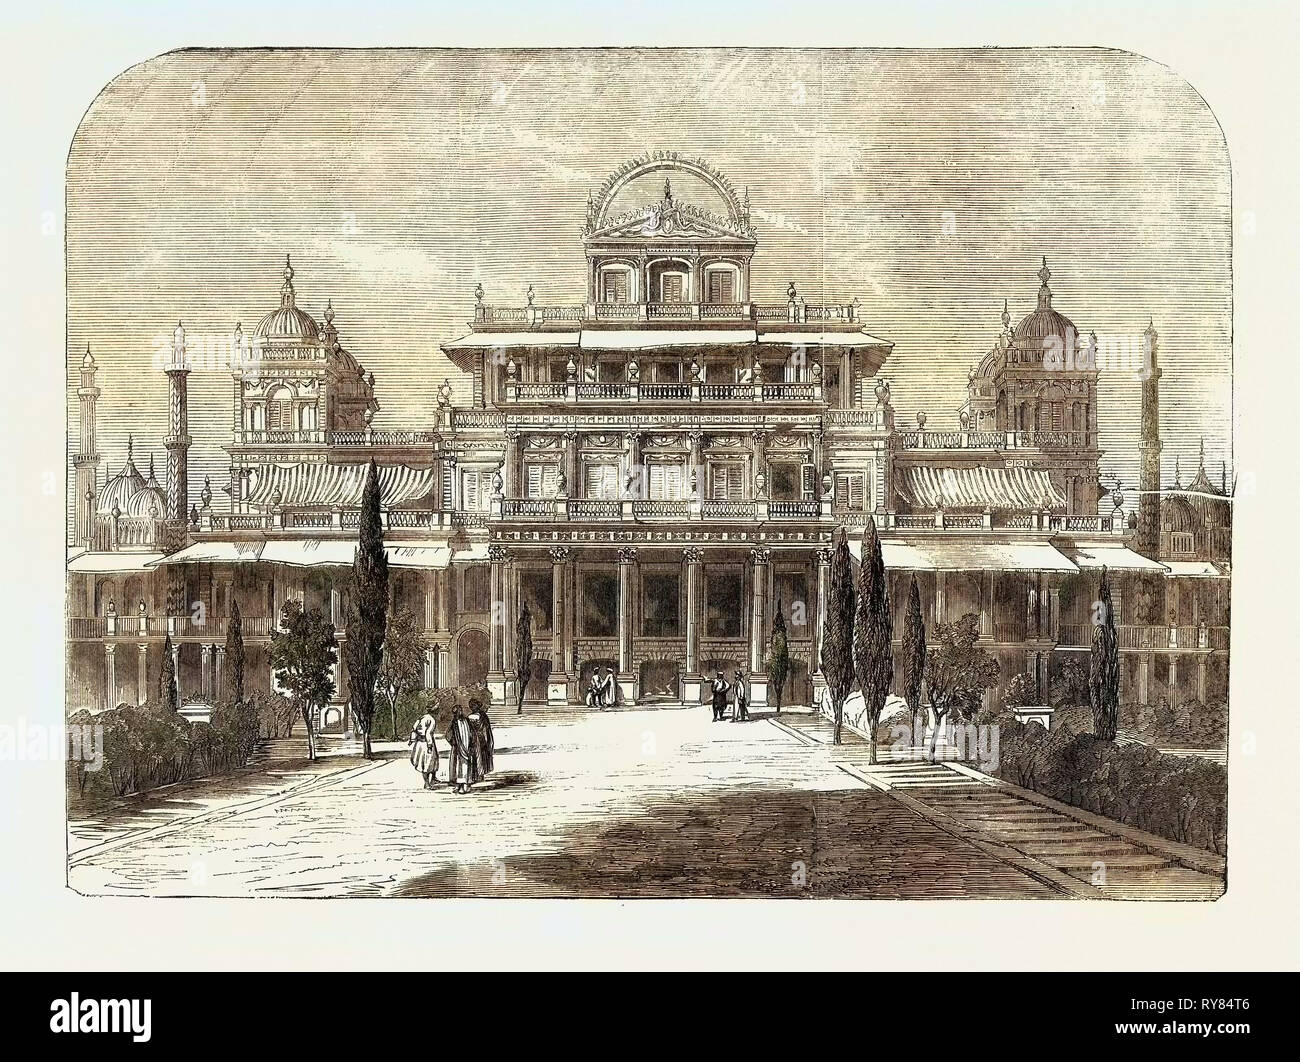 Die Kaiserbagh (King's Palace) Lucknow Stockfoto